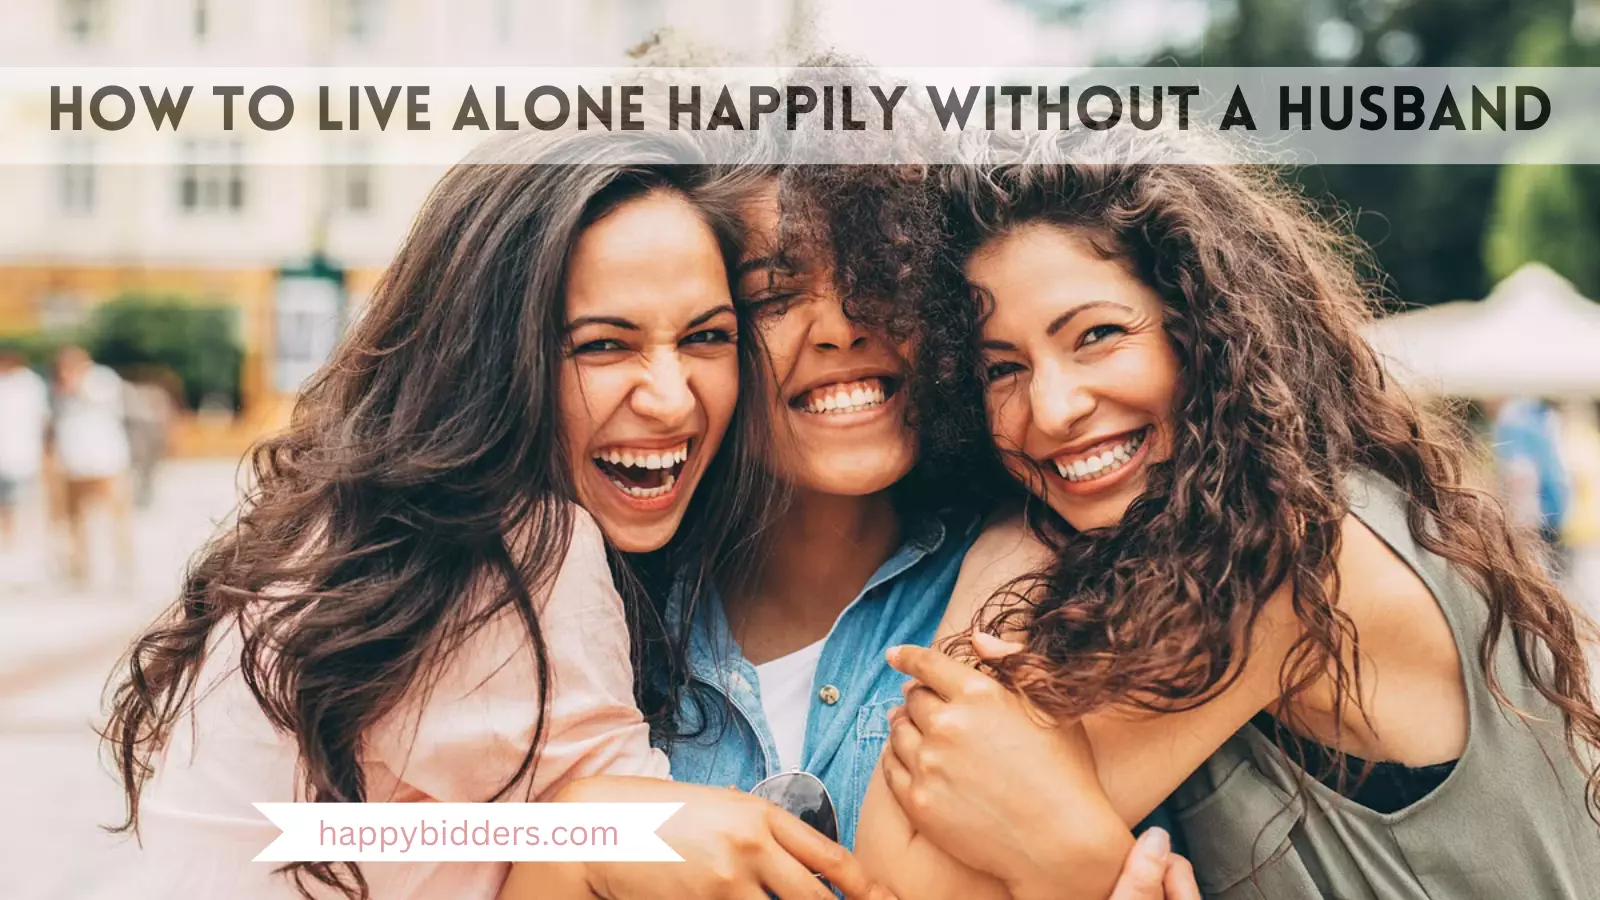 How to Live Alone Happily Without a Husband